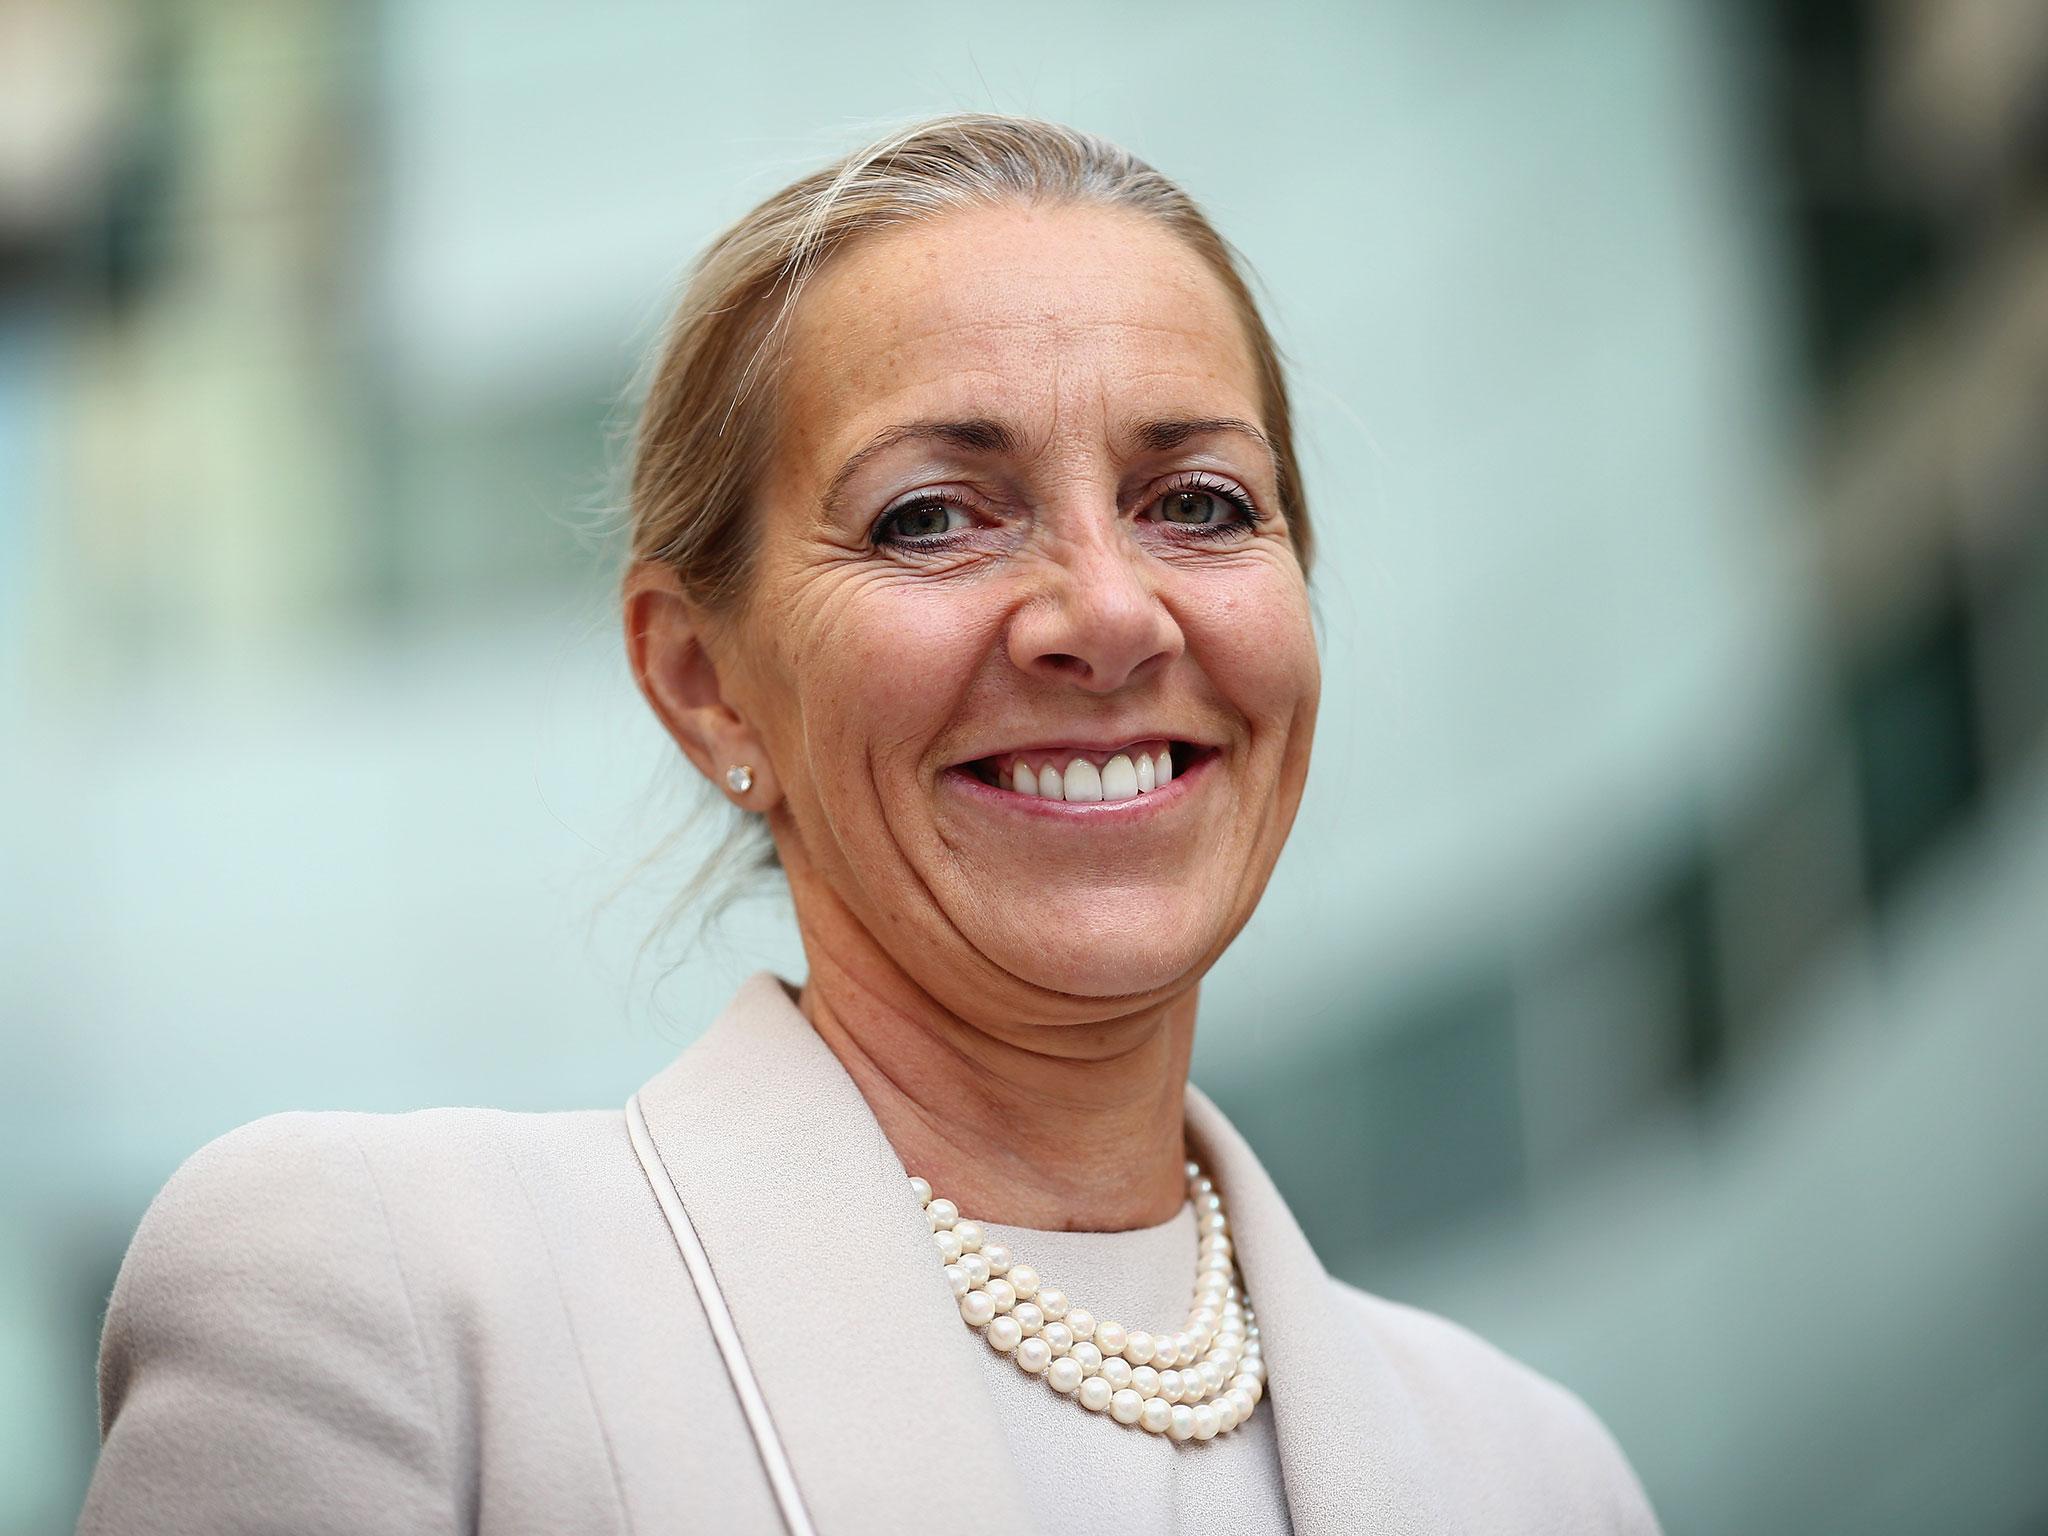 Rona Fairhead became the first female chair of BBC Trust when she took over the role in October 2014